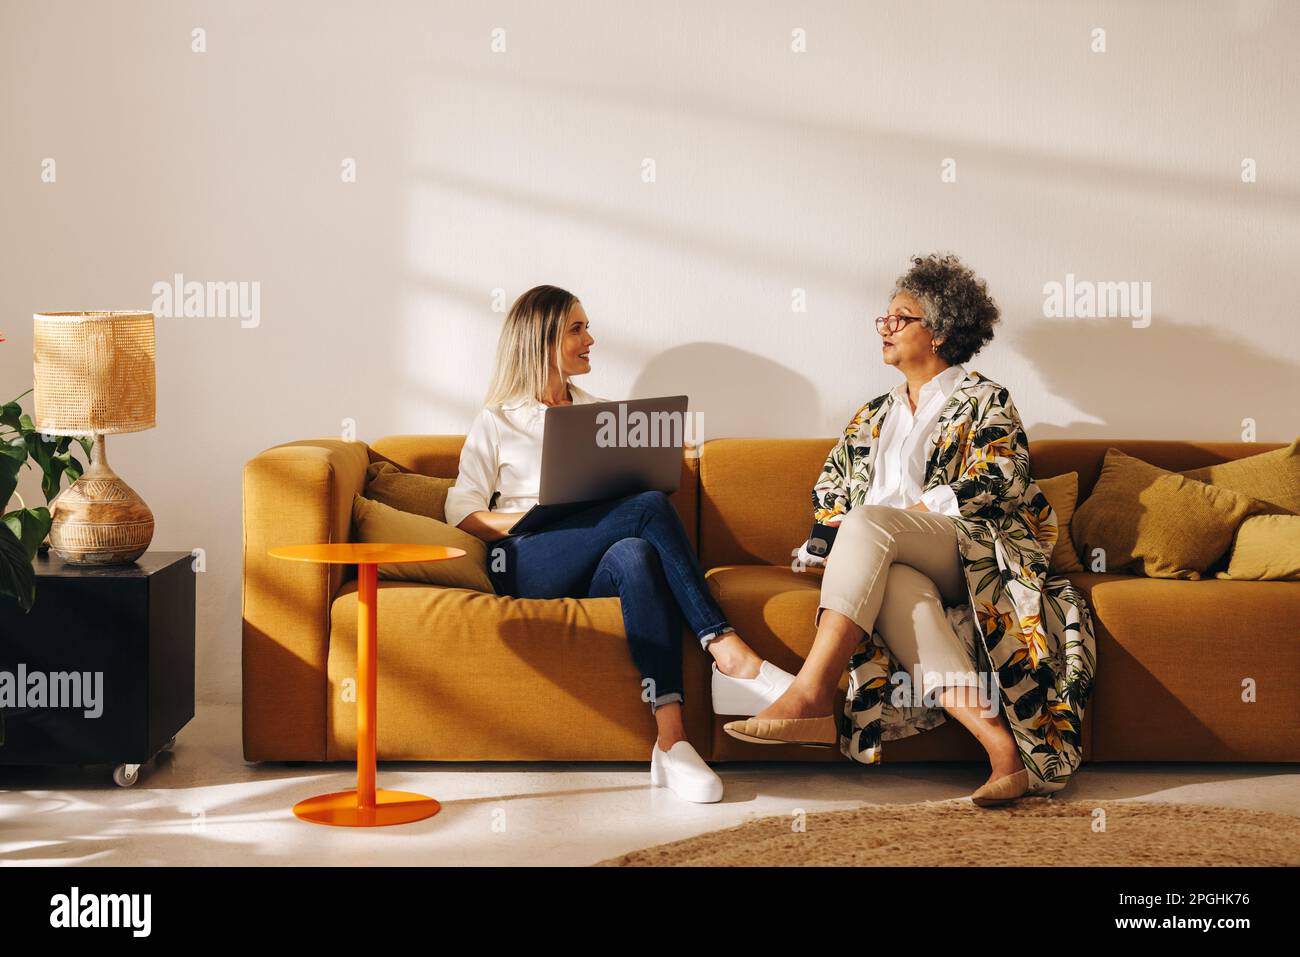 Female entrepreneurs having a discussion while working together in an office lobby. Two diverse businesswomen sitting on a couch in a woman-owned comp Stock Photo